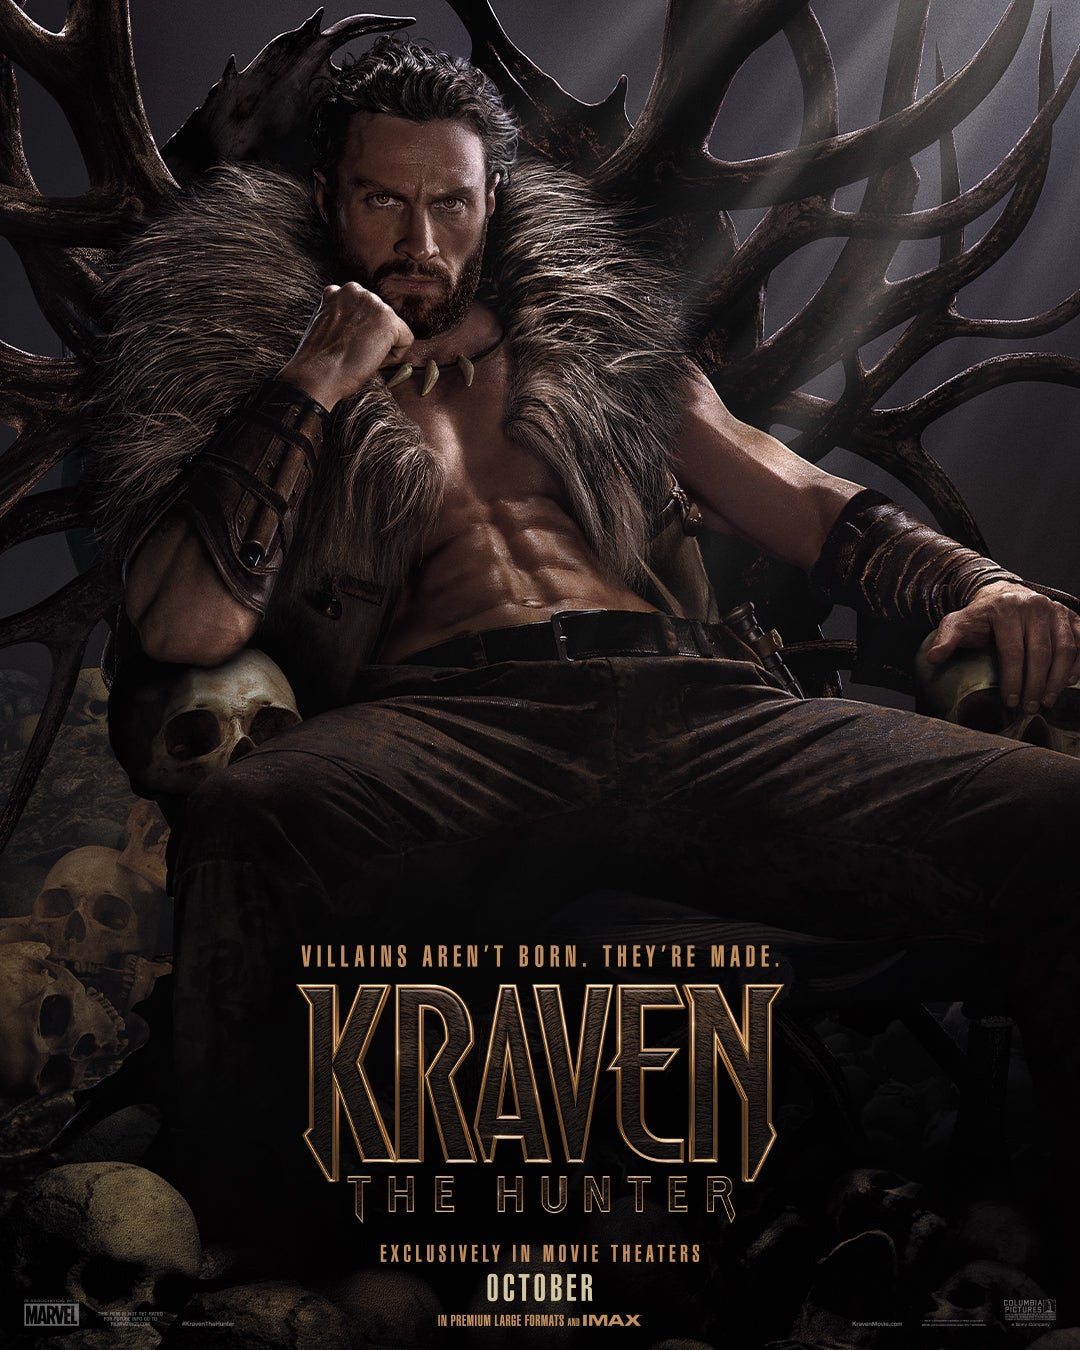 The full poster for Kraven the Hunter. (Image: Sony Pictures)